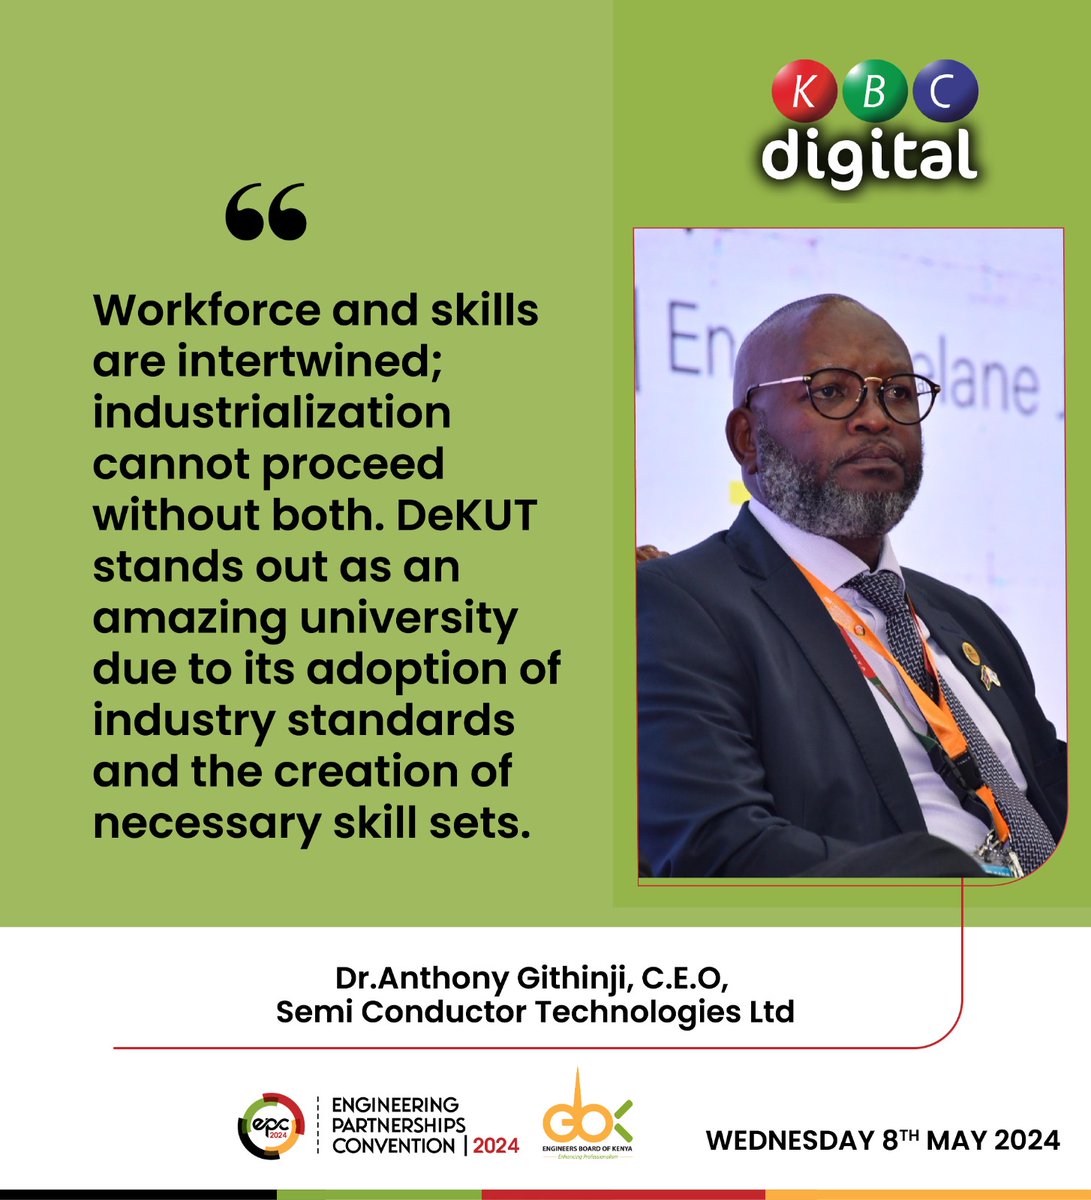 Engineers Partnership Convention Dr Anthony Githinji emphasizes the interconnection between workforce and skills; industrialization cannot advance without both components. #KBCniYetu #EPC2024 @EngineersBoard